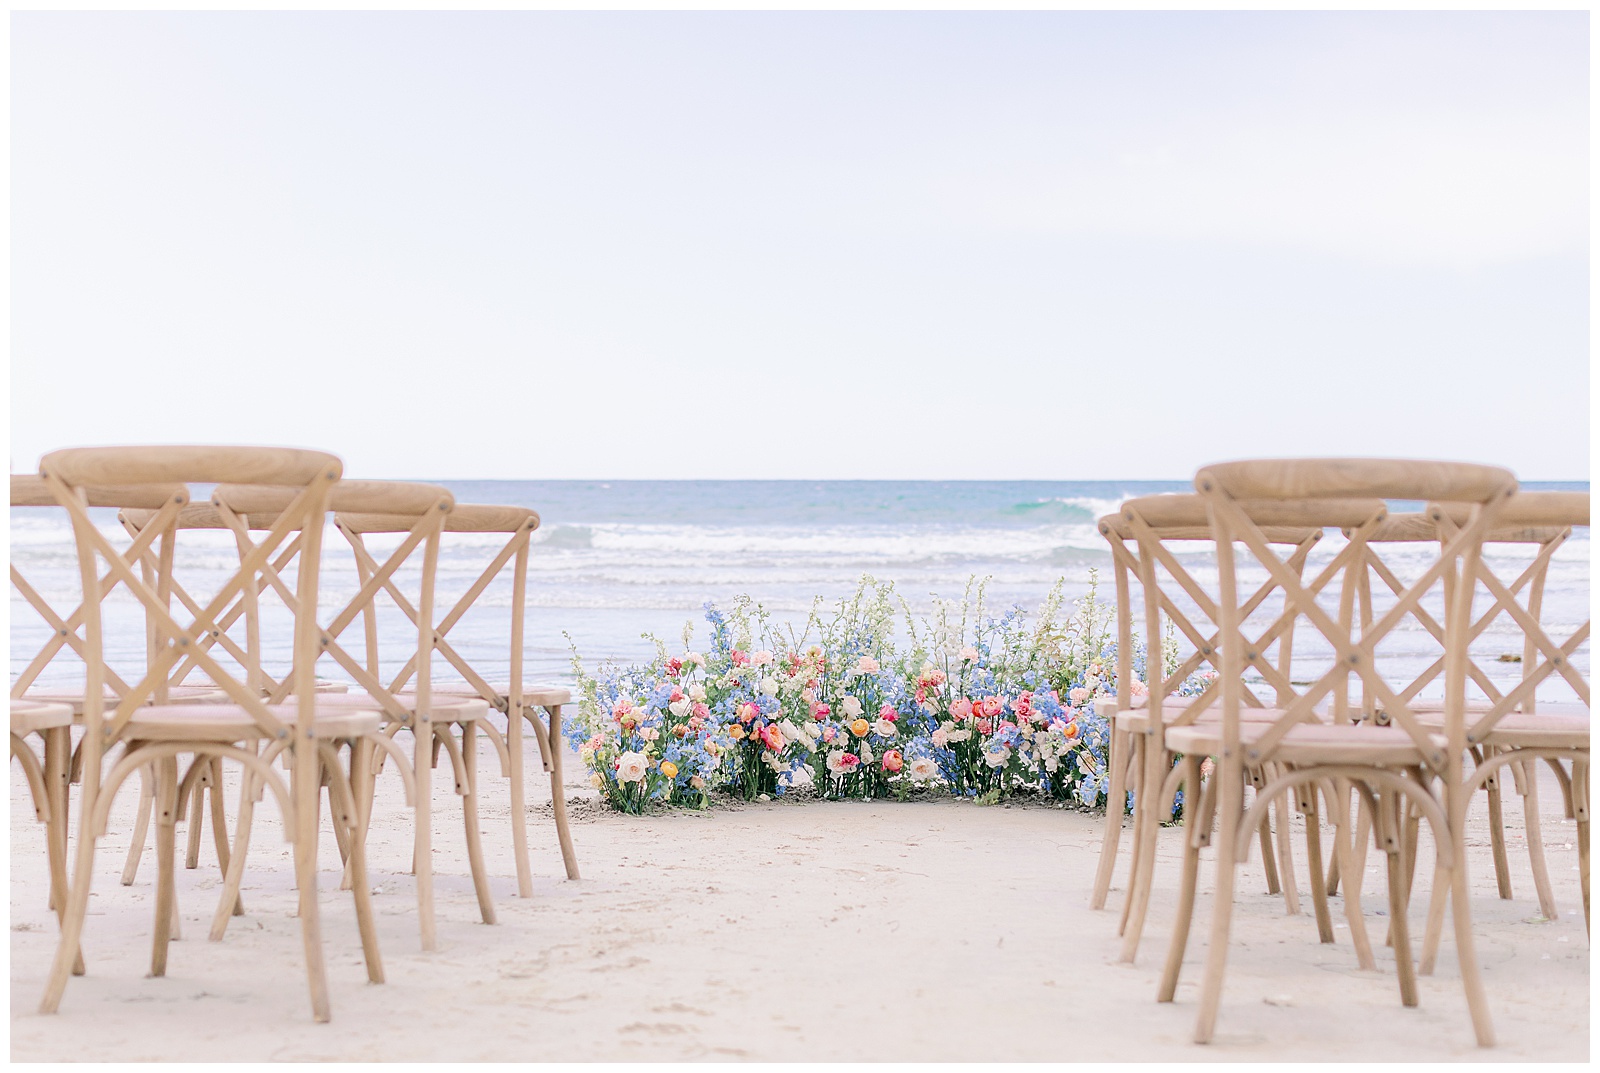 La Jolla wedding venue on the beach with flowers and ocean in the background